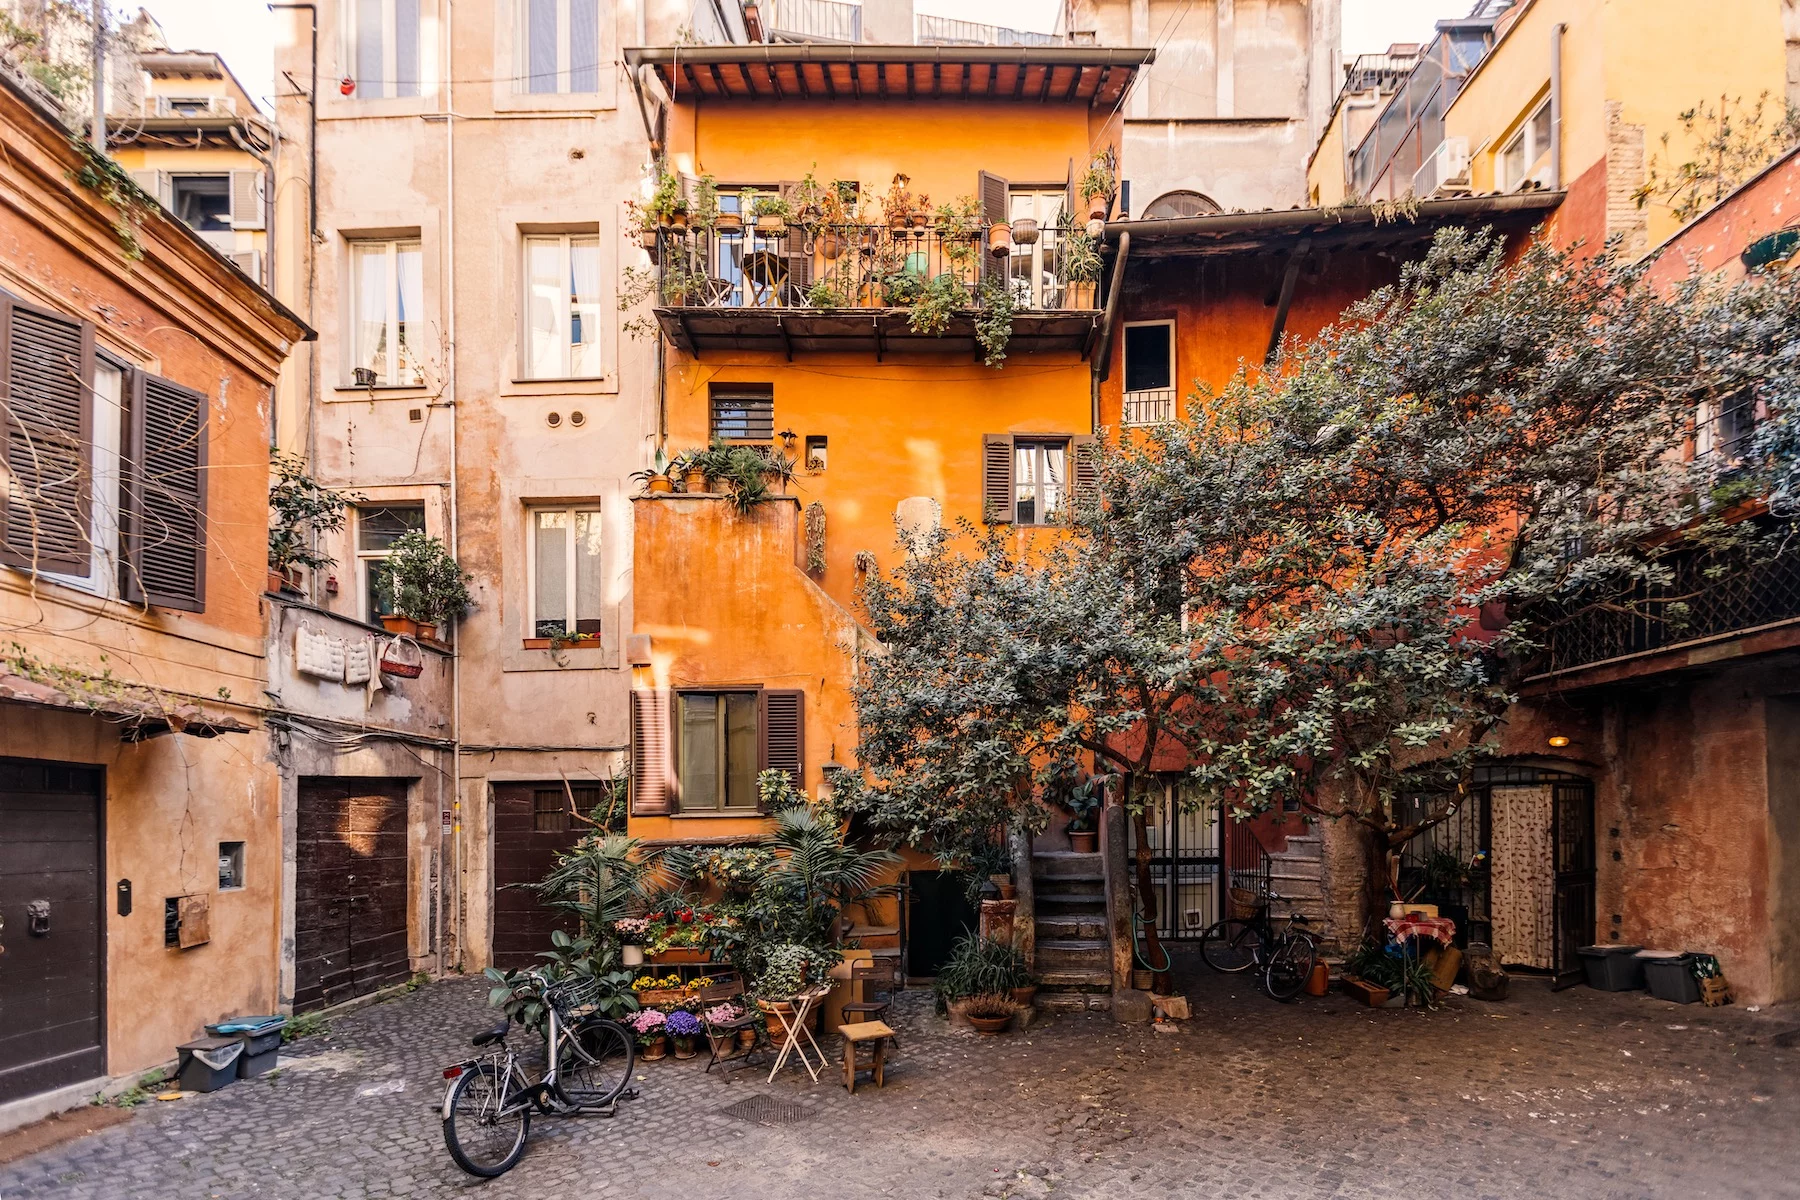 Old Italian apartment buildings create a sunny courtyard full of trees, flowers, and bicycles